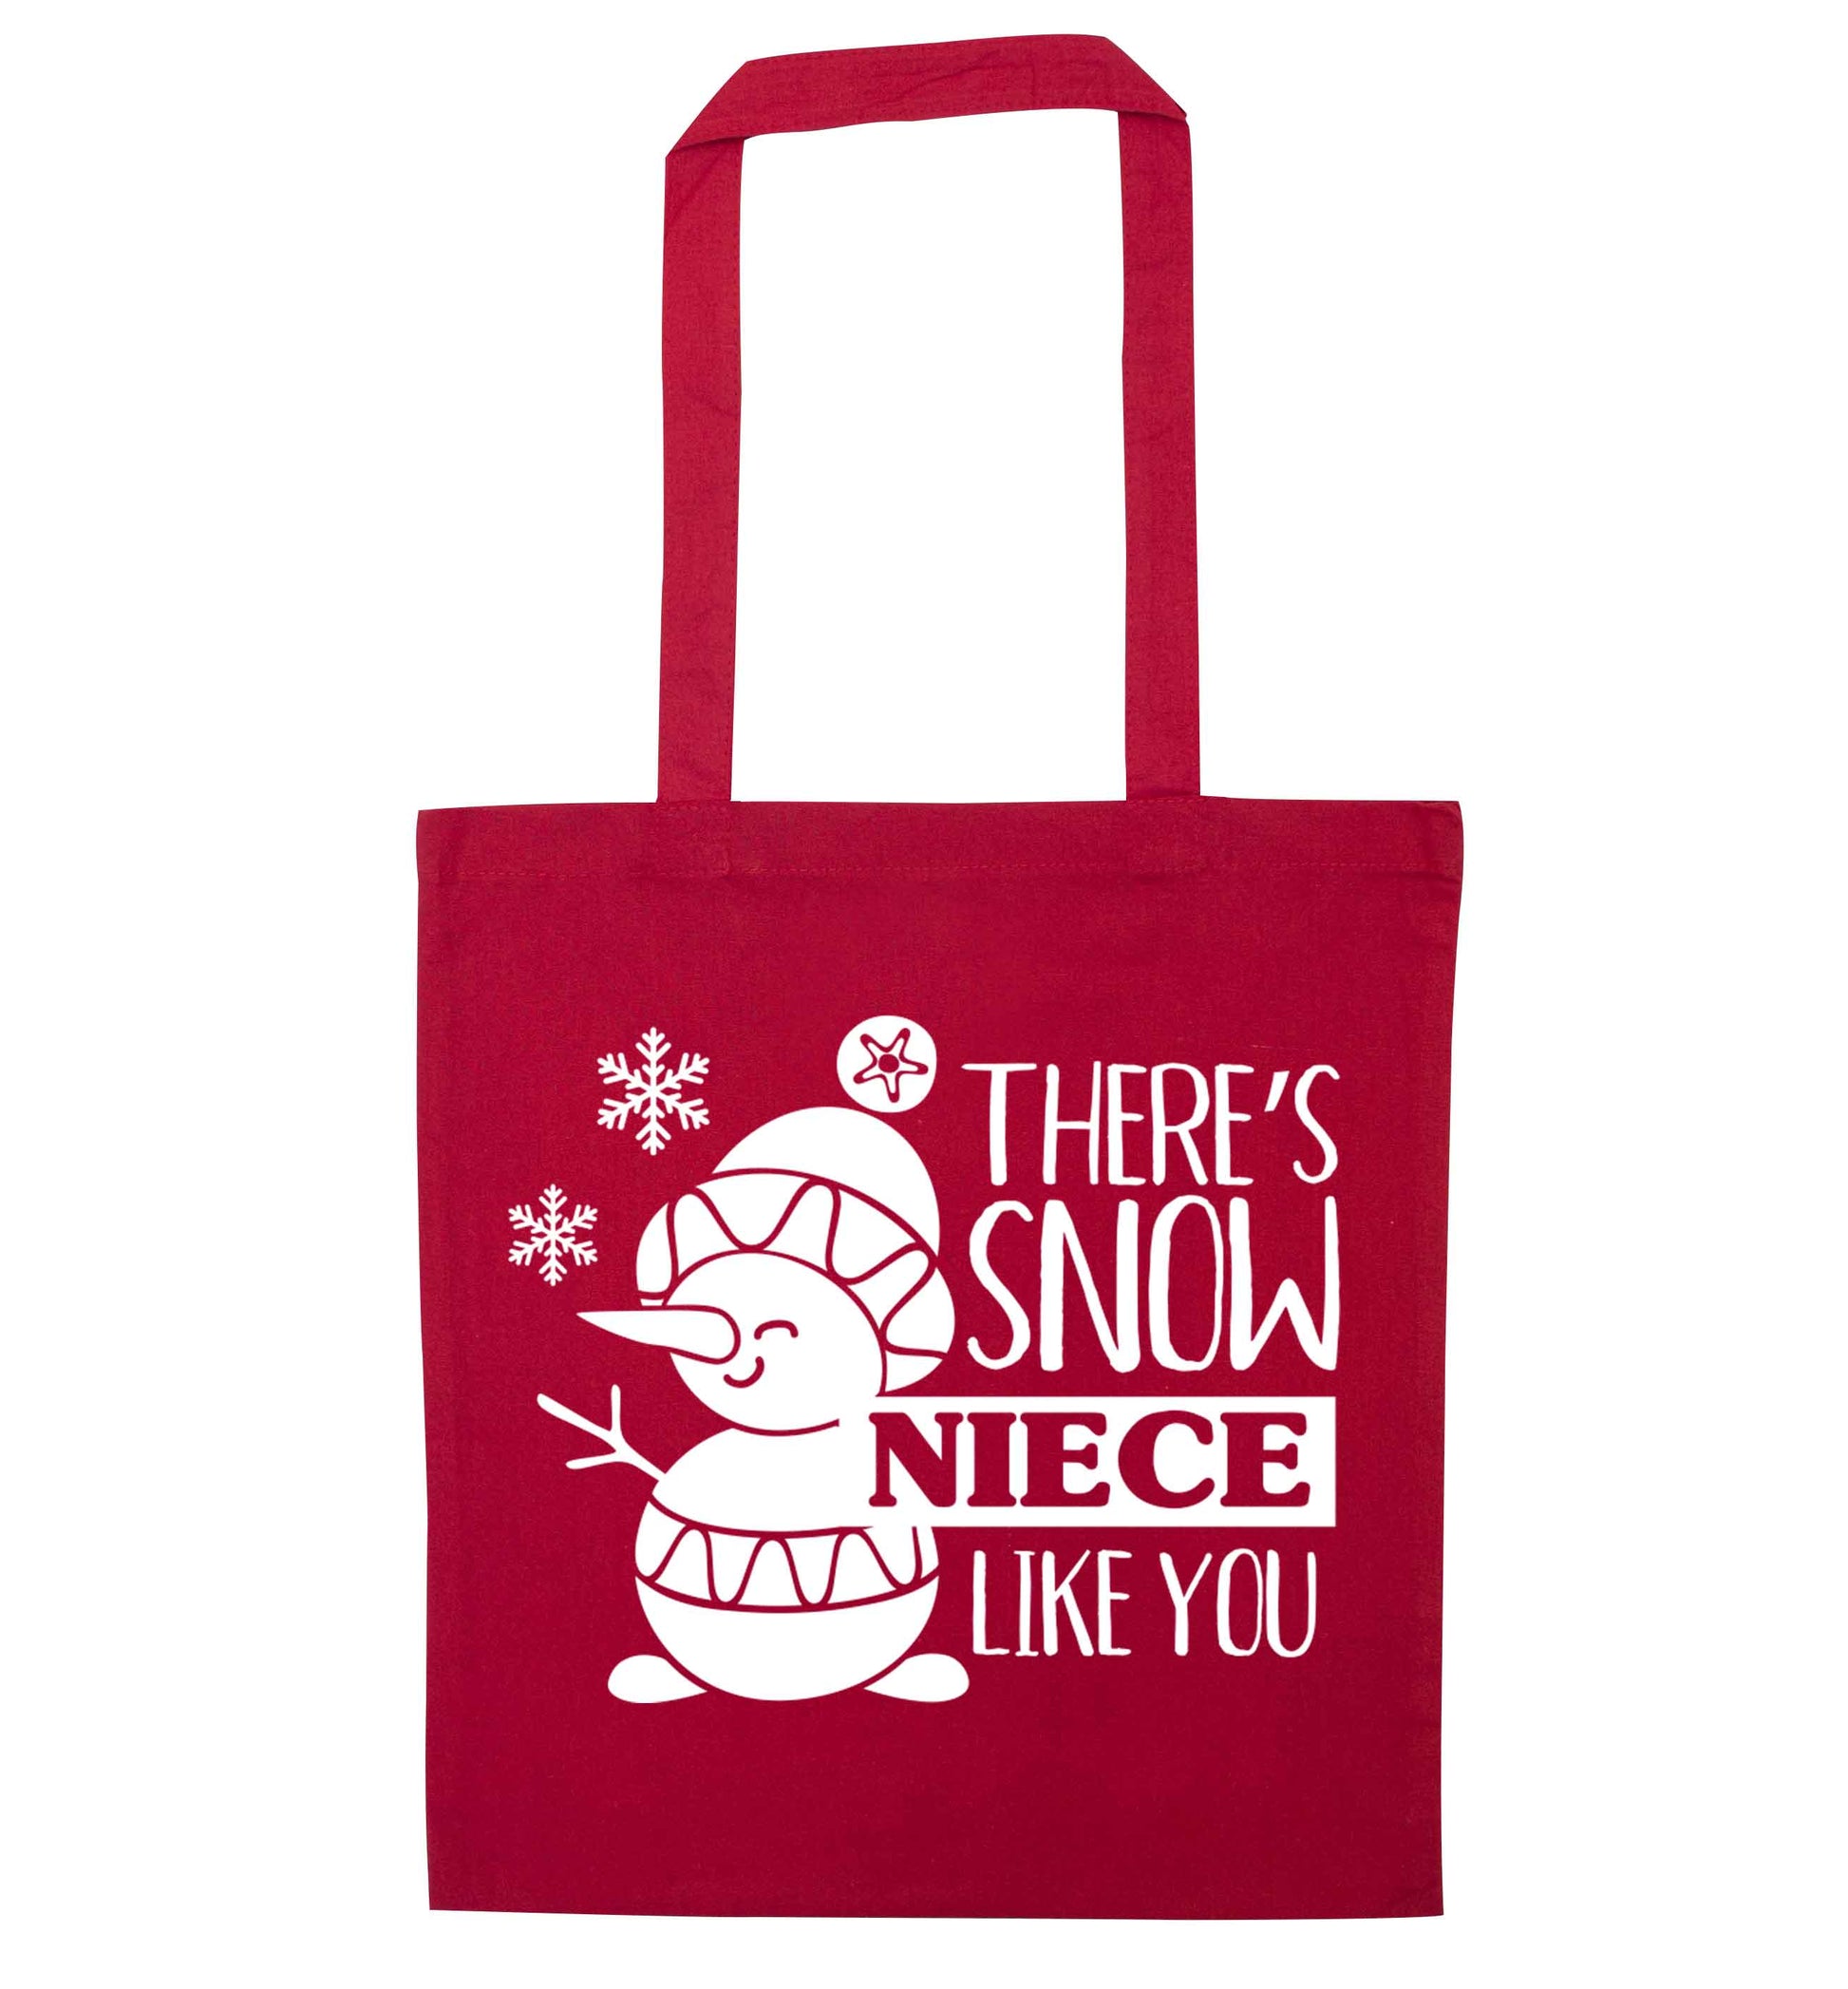 There's snow niece like you red tote bag